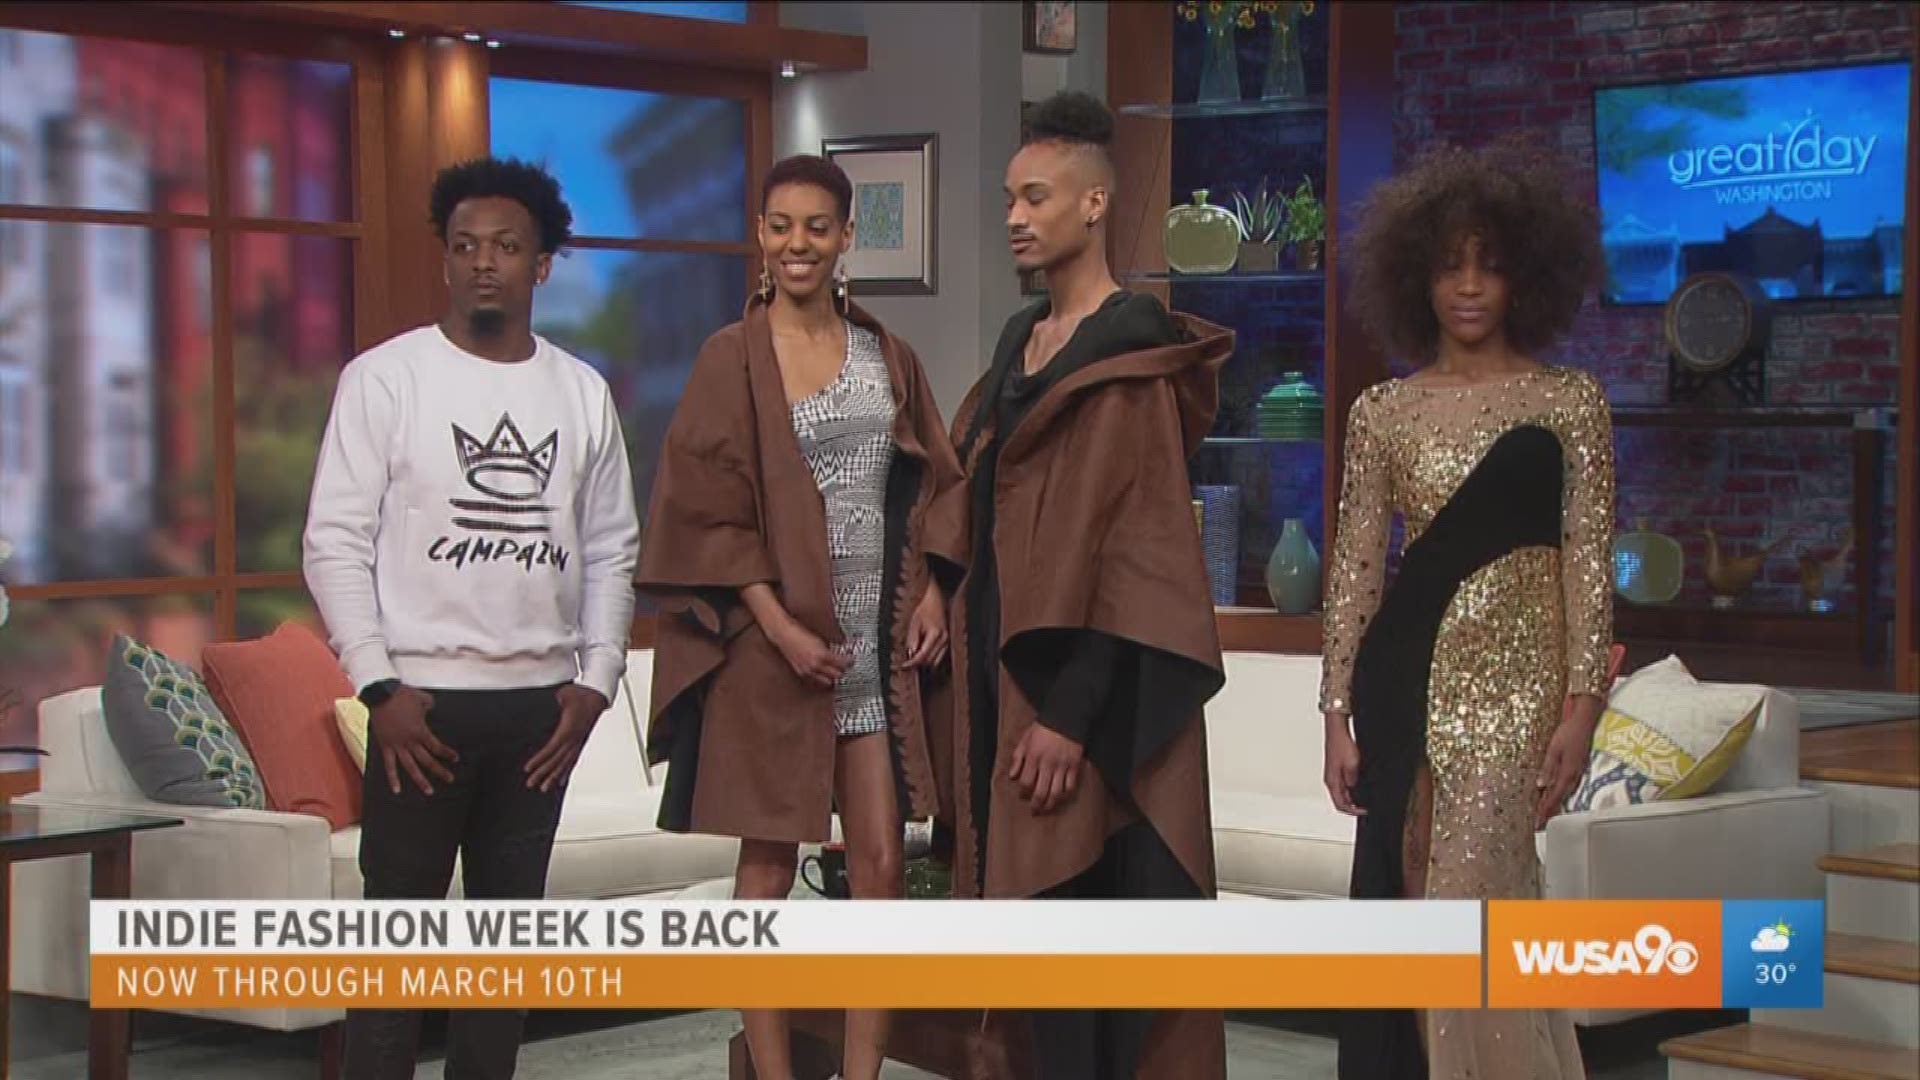 Harley Morgan, Executive Producer of Indie Fashion Week talks about the yearly event and the importance of shopping/spending local.  We preview a couple of fashionable styles by local independent fashion houses.